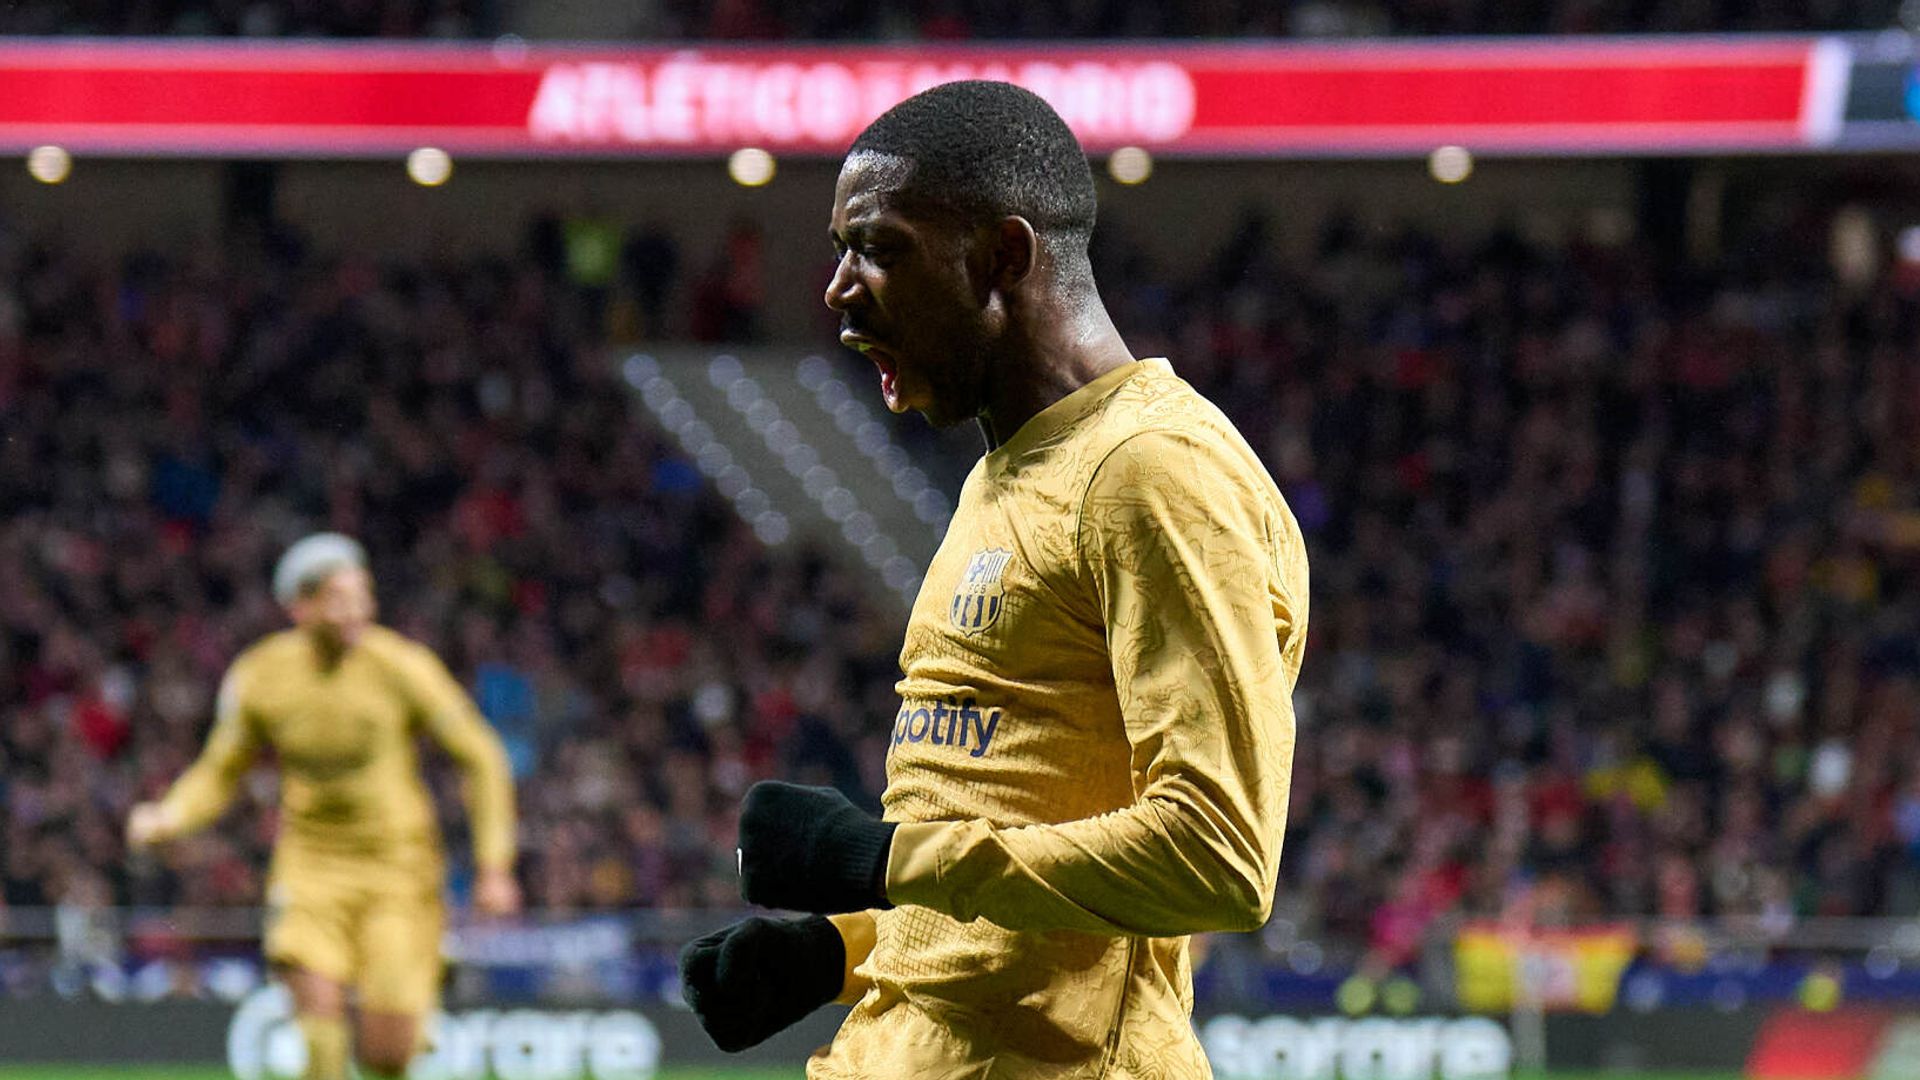 Euro round-up: Dembele fires Barca to Atleti win